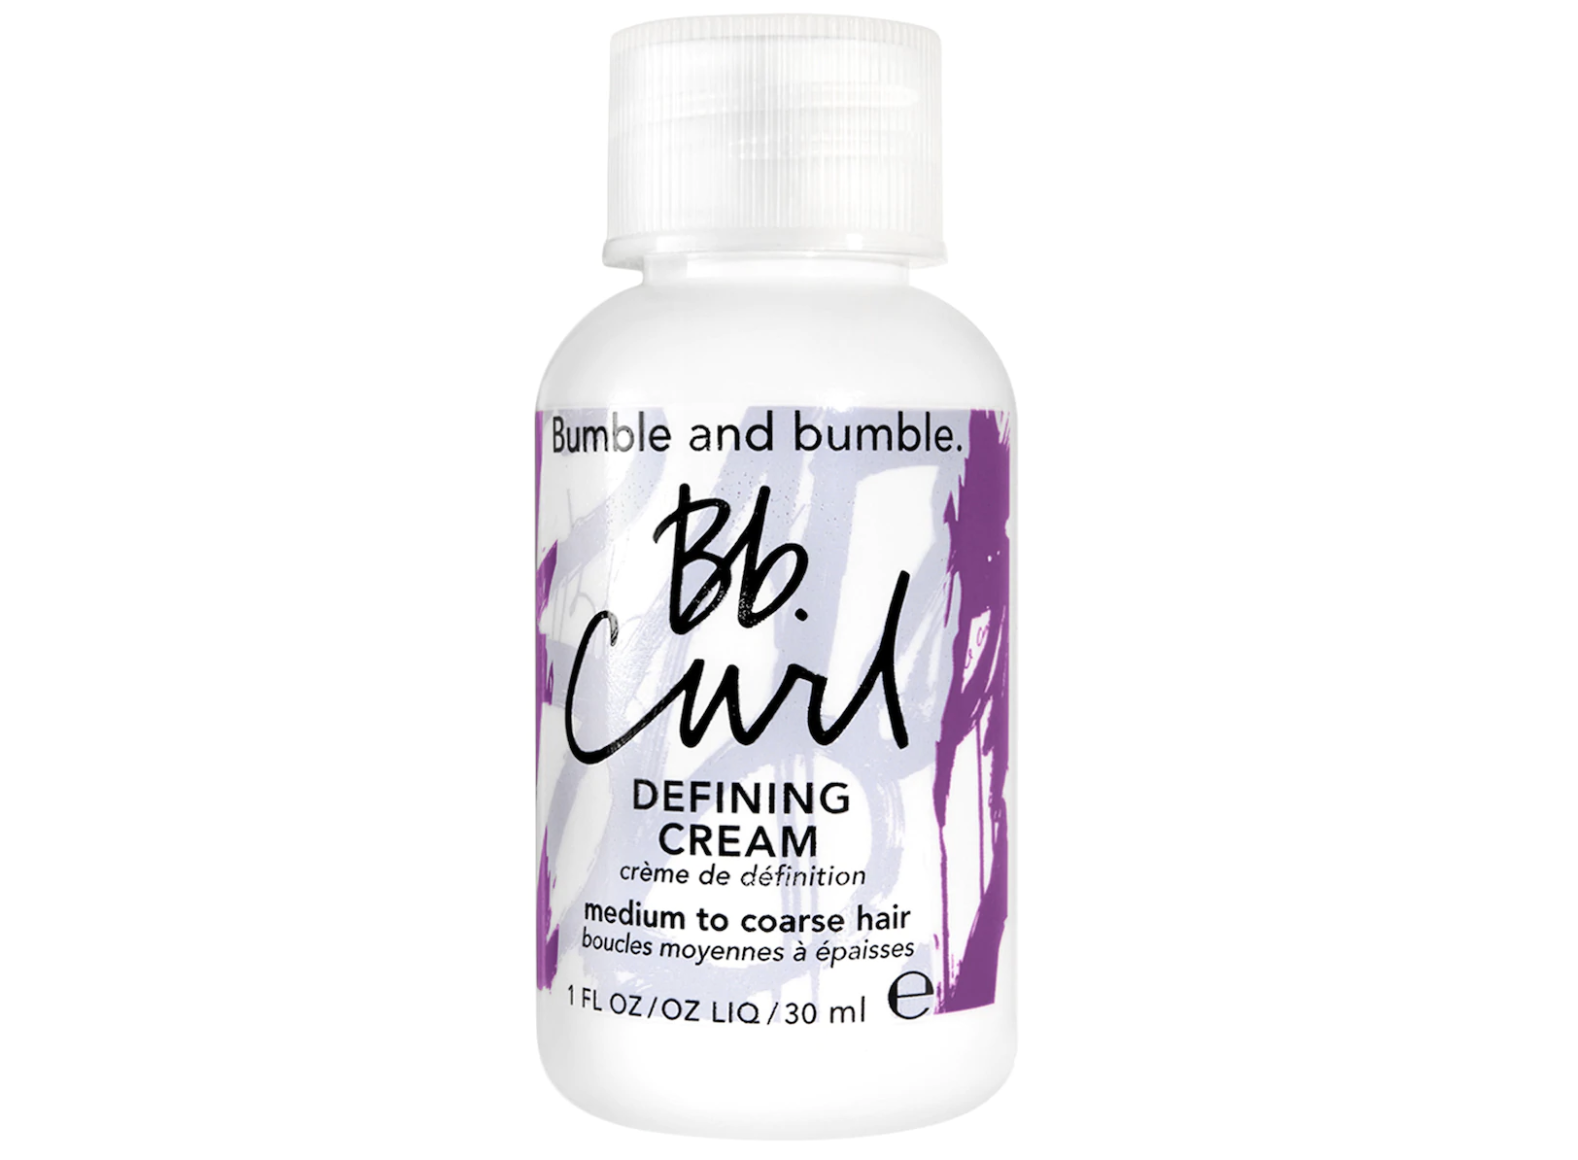 9. Bumble and Bumble Bb. Curl (Style) Defining Creme for Blondes - wide 6